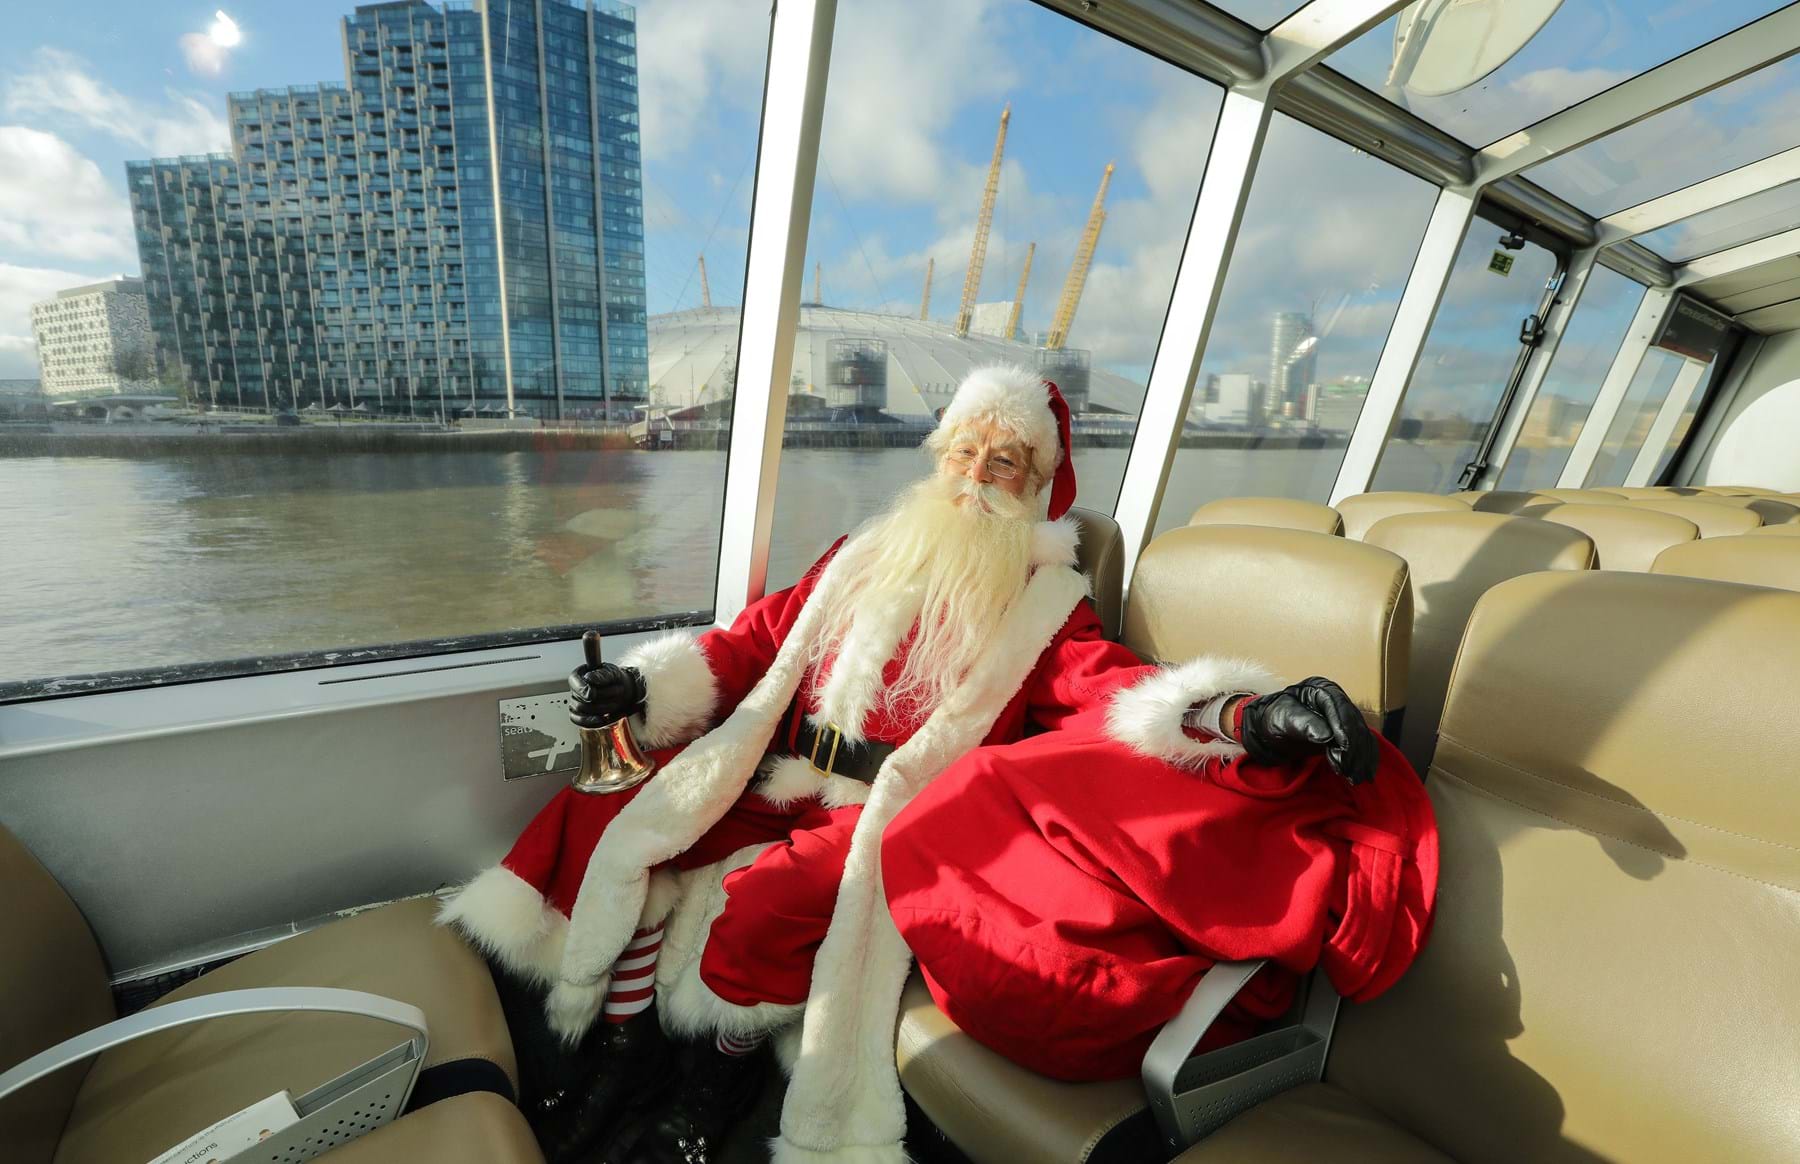 Santa Claus on board with The O2 in the background